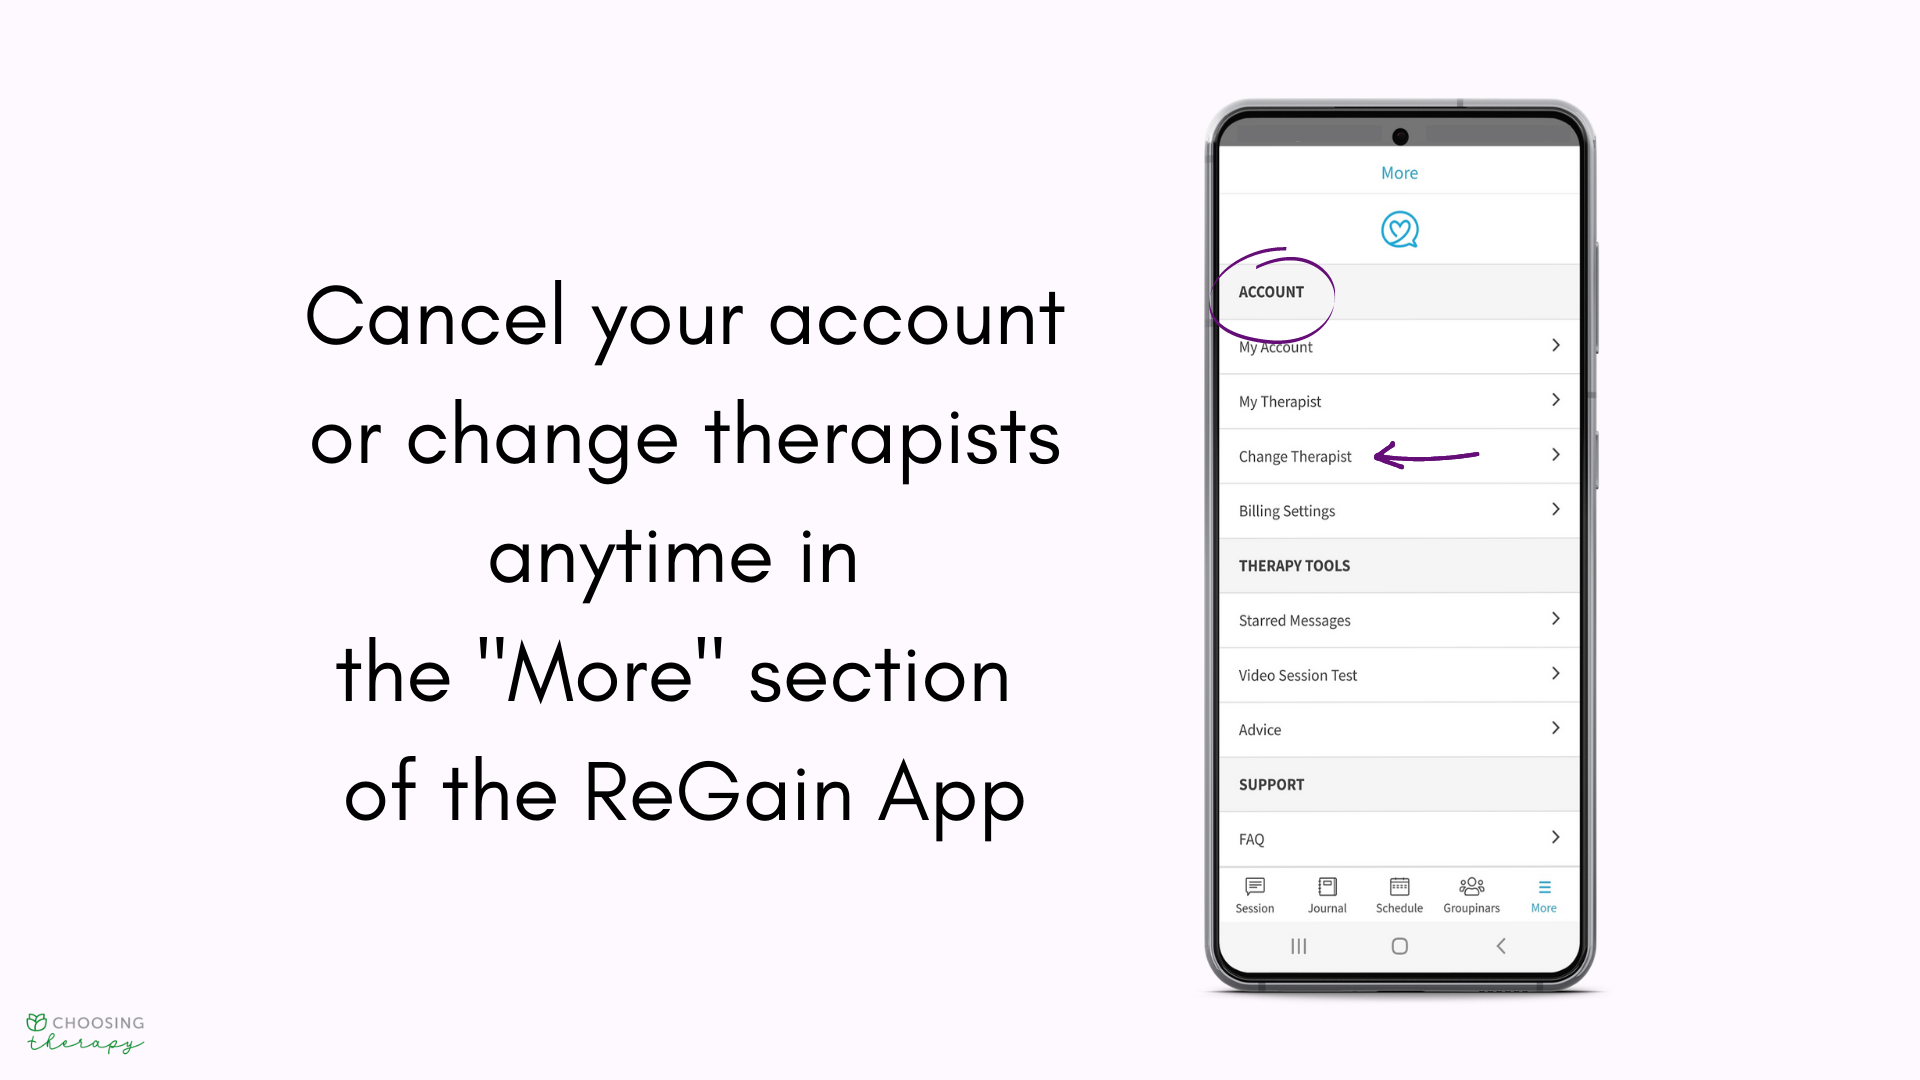 ReGain Couples Counseling Review 2022 - Image of More section of the ReGain app, cancel account or change therapists